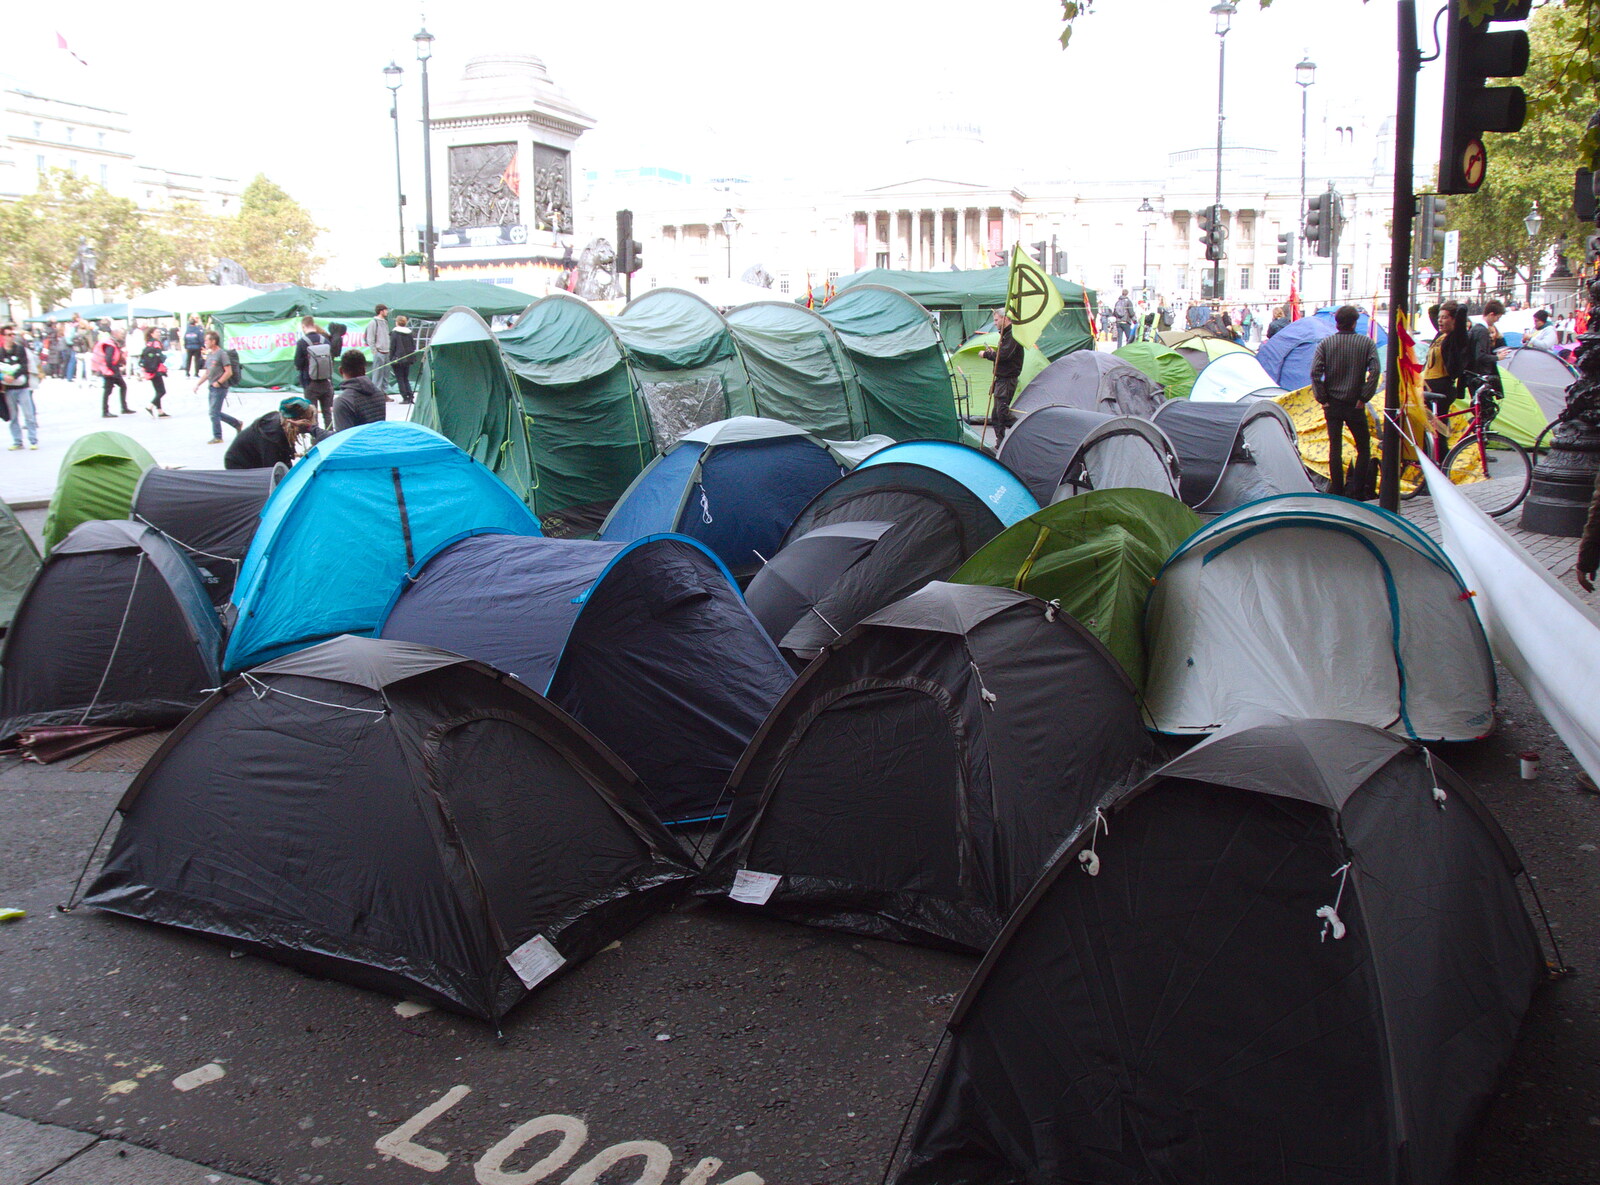 Tent City in Trafalgar Square from The Extinction Rebellion Protest, Westminster, London - 9th October 2019